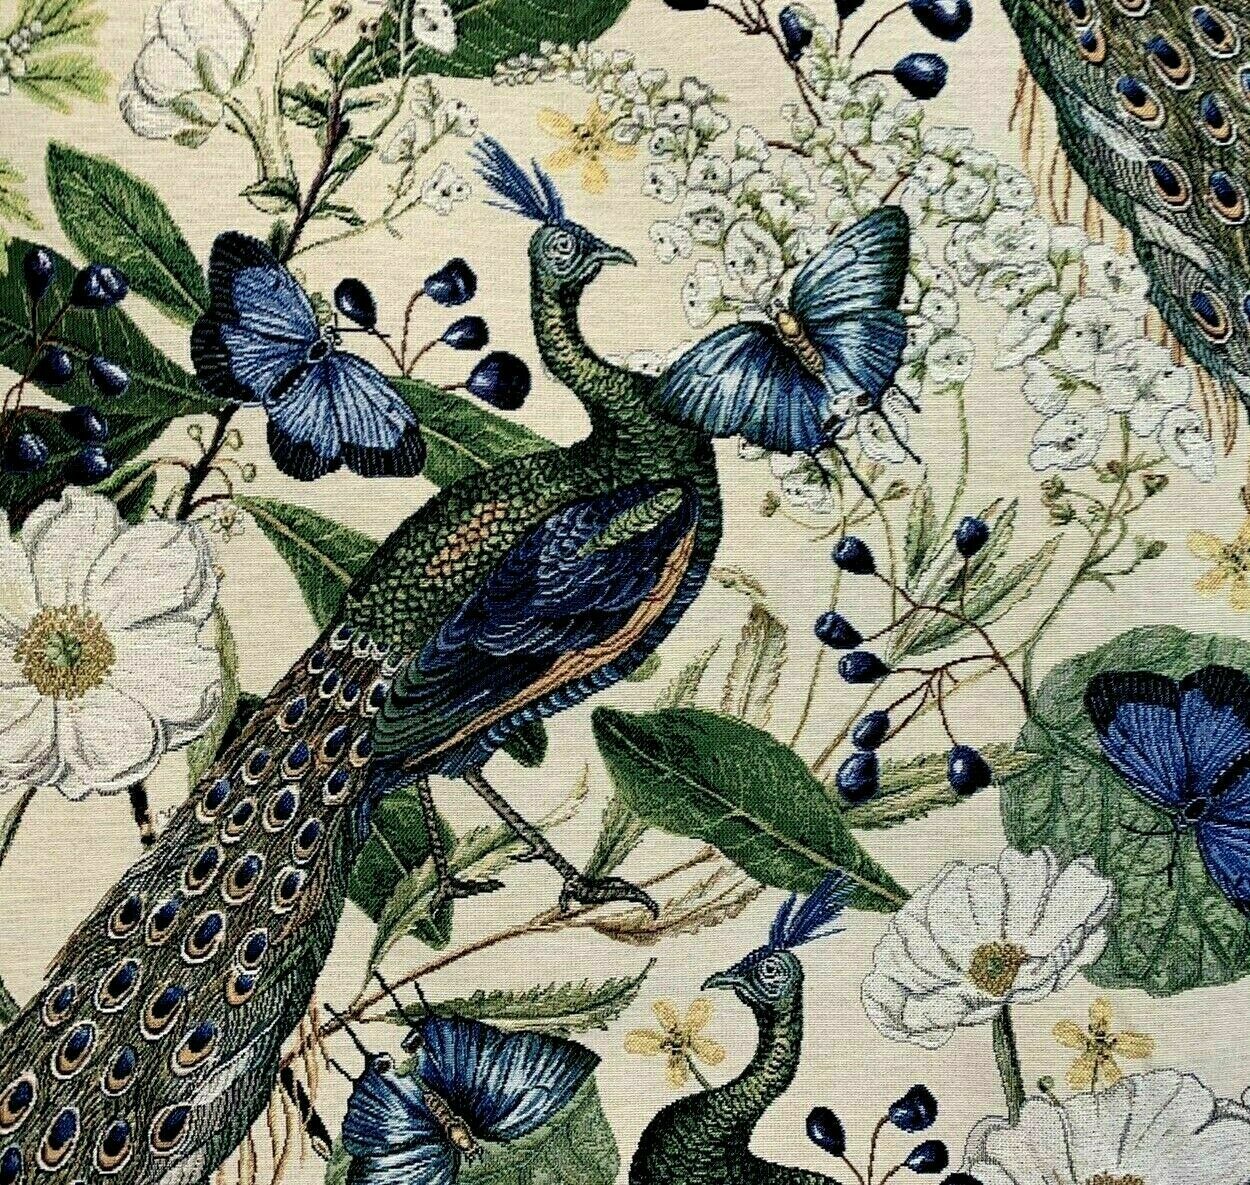 Peacock Butterflies Birds Botanical Woven Fabric Sold by Meter Floral Upholstery Textile Beige Sewing Material